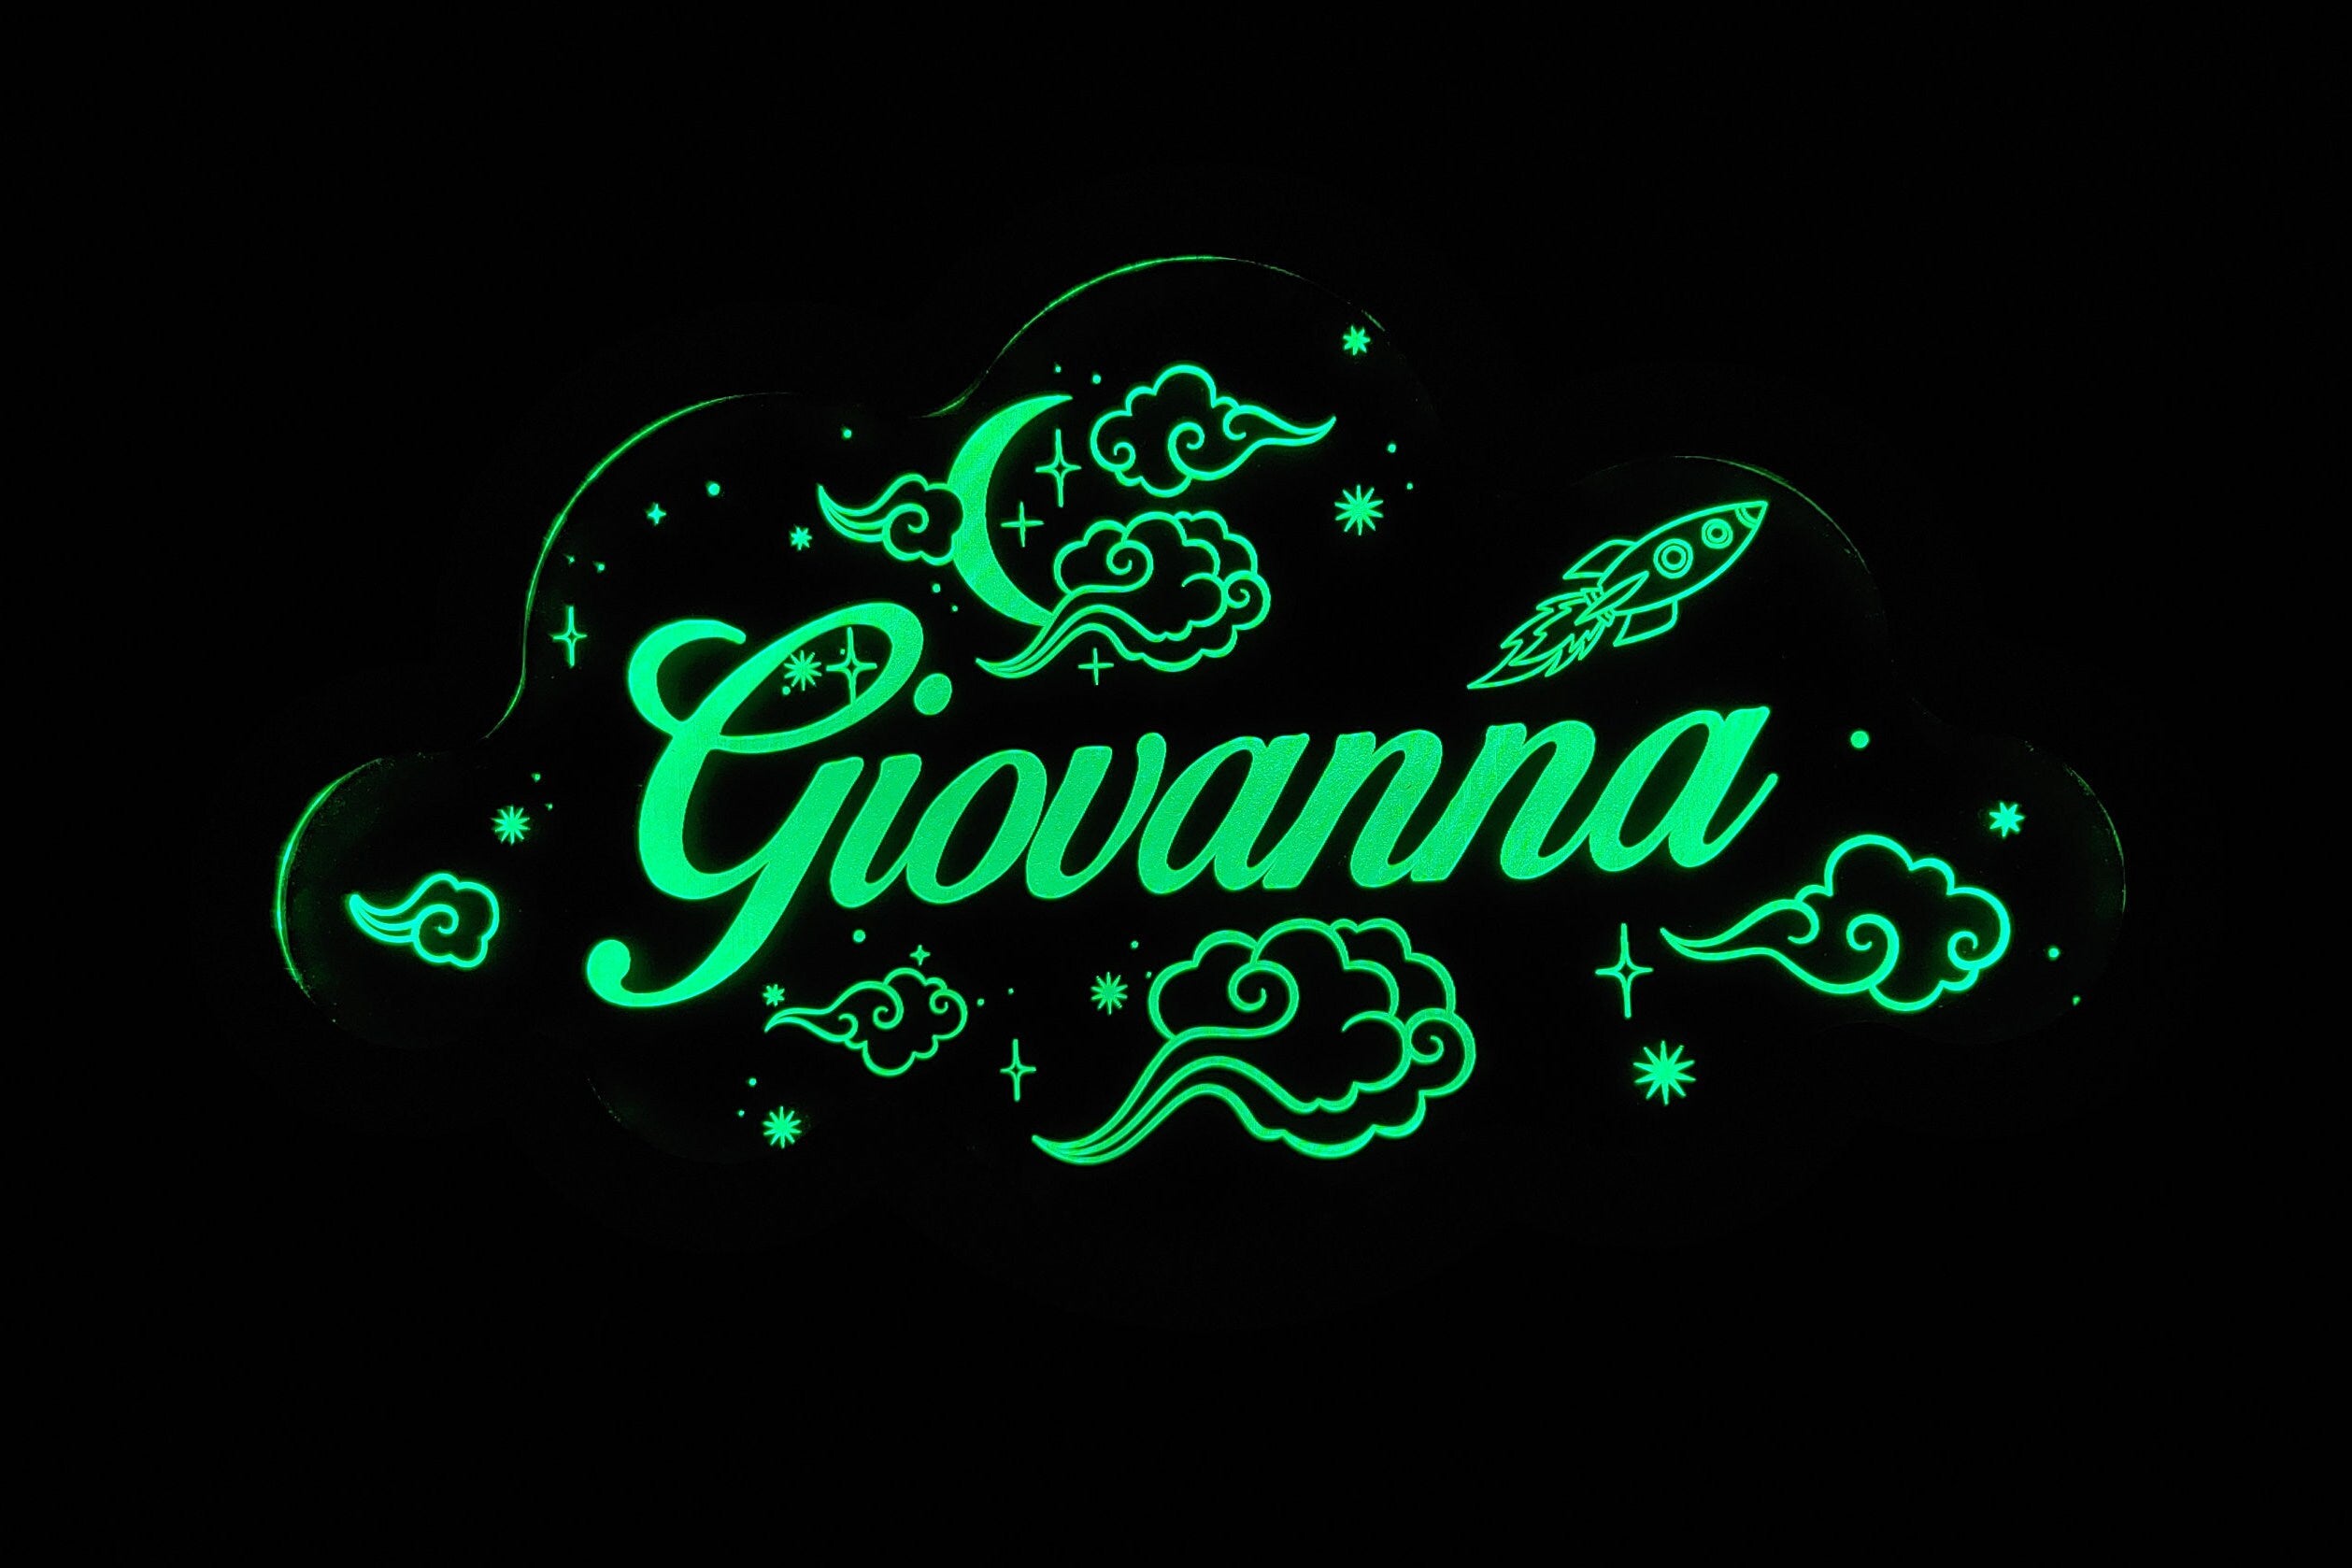 Personalized Baby Nursery Name LED Wall Sign - Neon-Like - Children's Night Light - Color Changing w Remote Control - Free Shipping